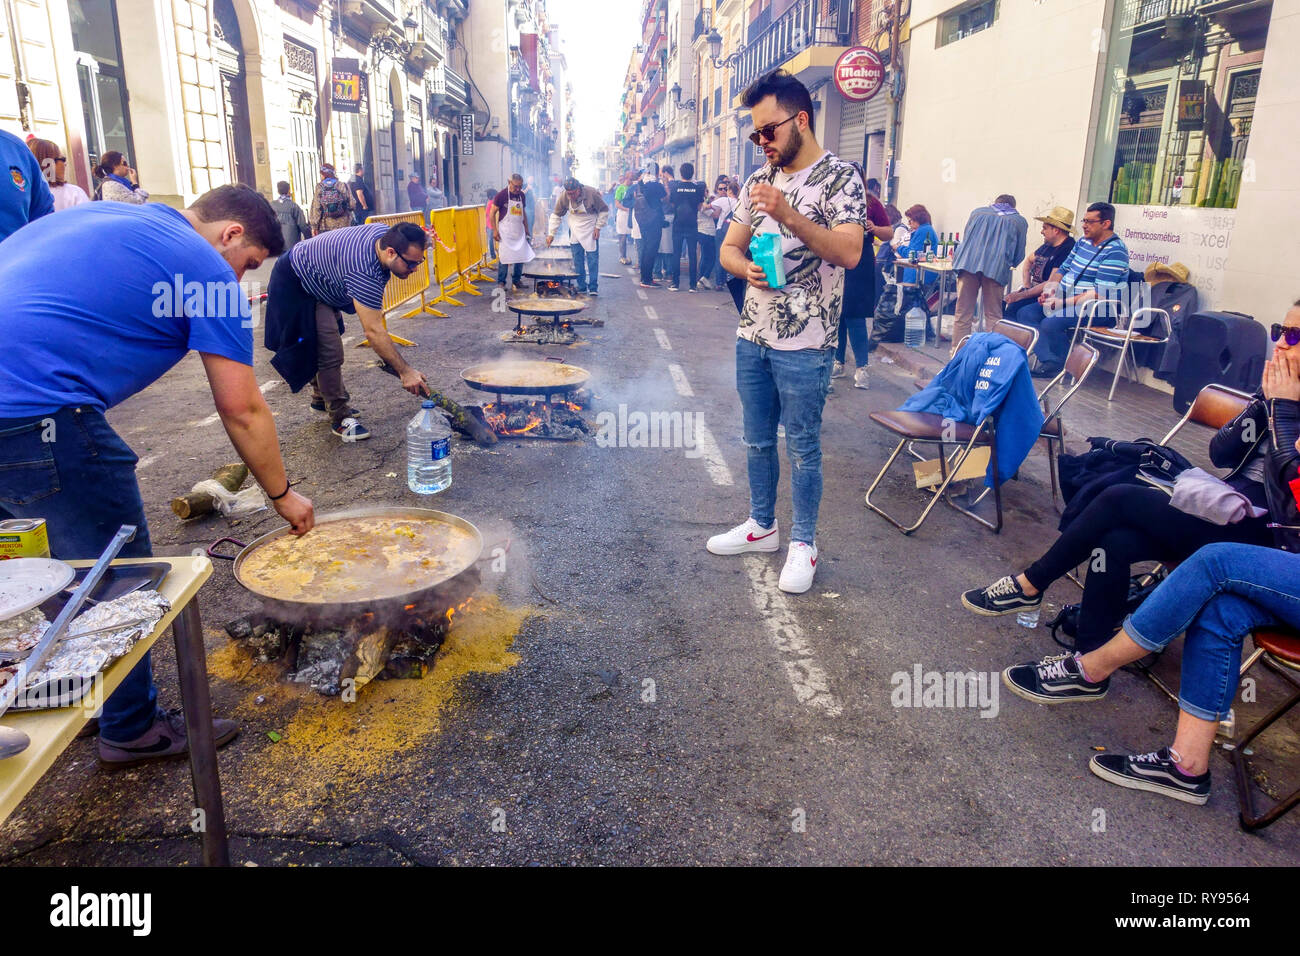 Members of Fallas preparing paella on the street and then having lunch together, Fallas party Funfair Valencia, Barrio El Botanico Stock Photo